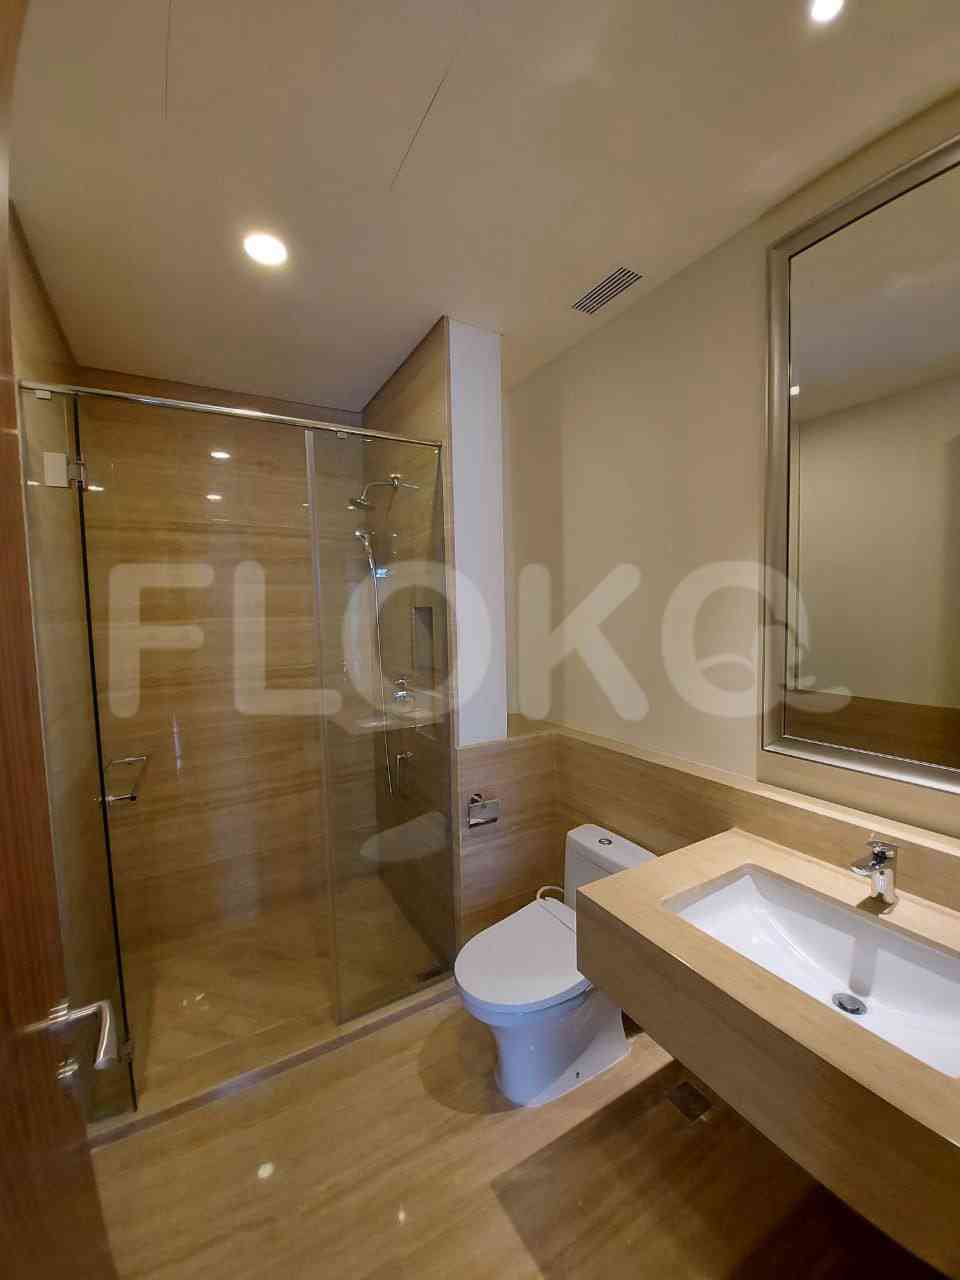 2 Bedroom on 20th Floor for Rent in South Hills Apartment - fku012 5